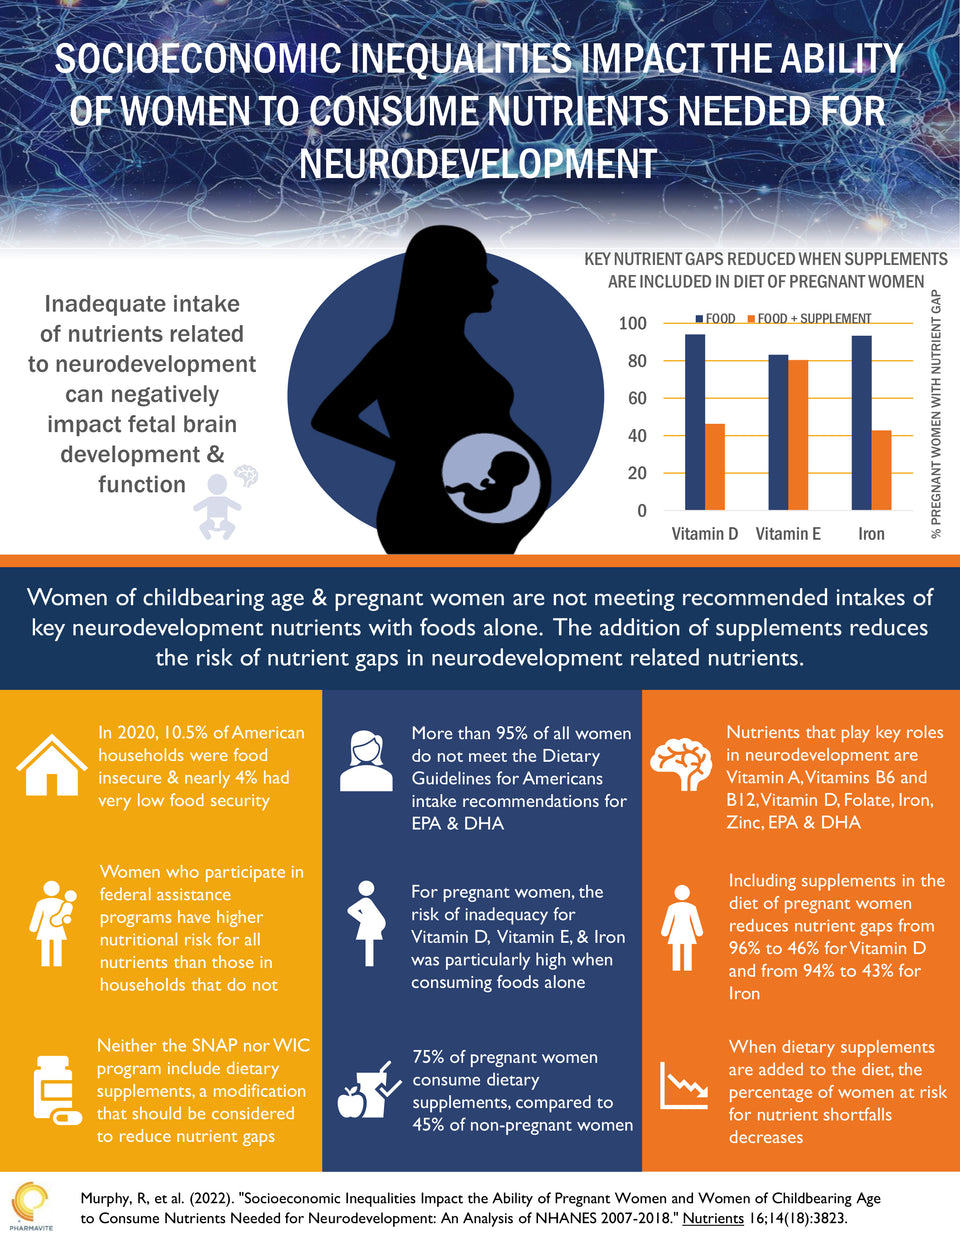 Socioeconomic Inequalities Impact The Ability Of Women To Consume Nutrients Needed For Neurodevelopment